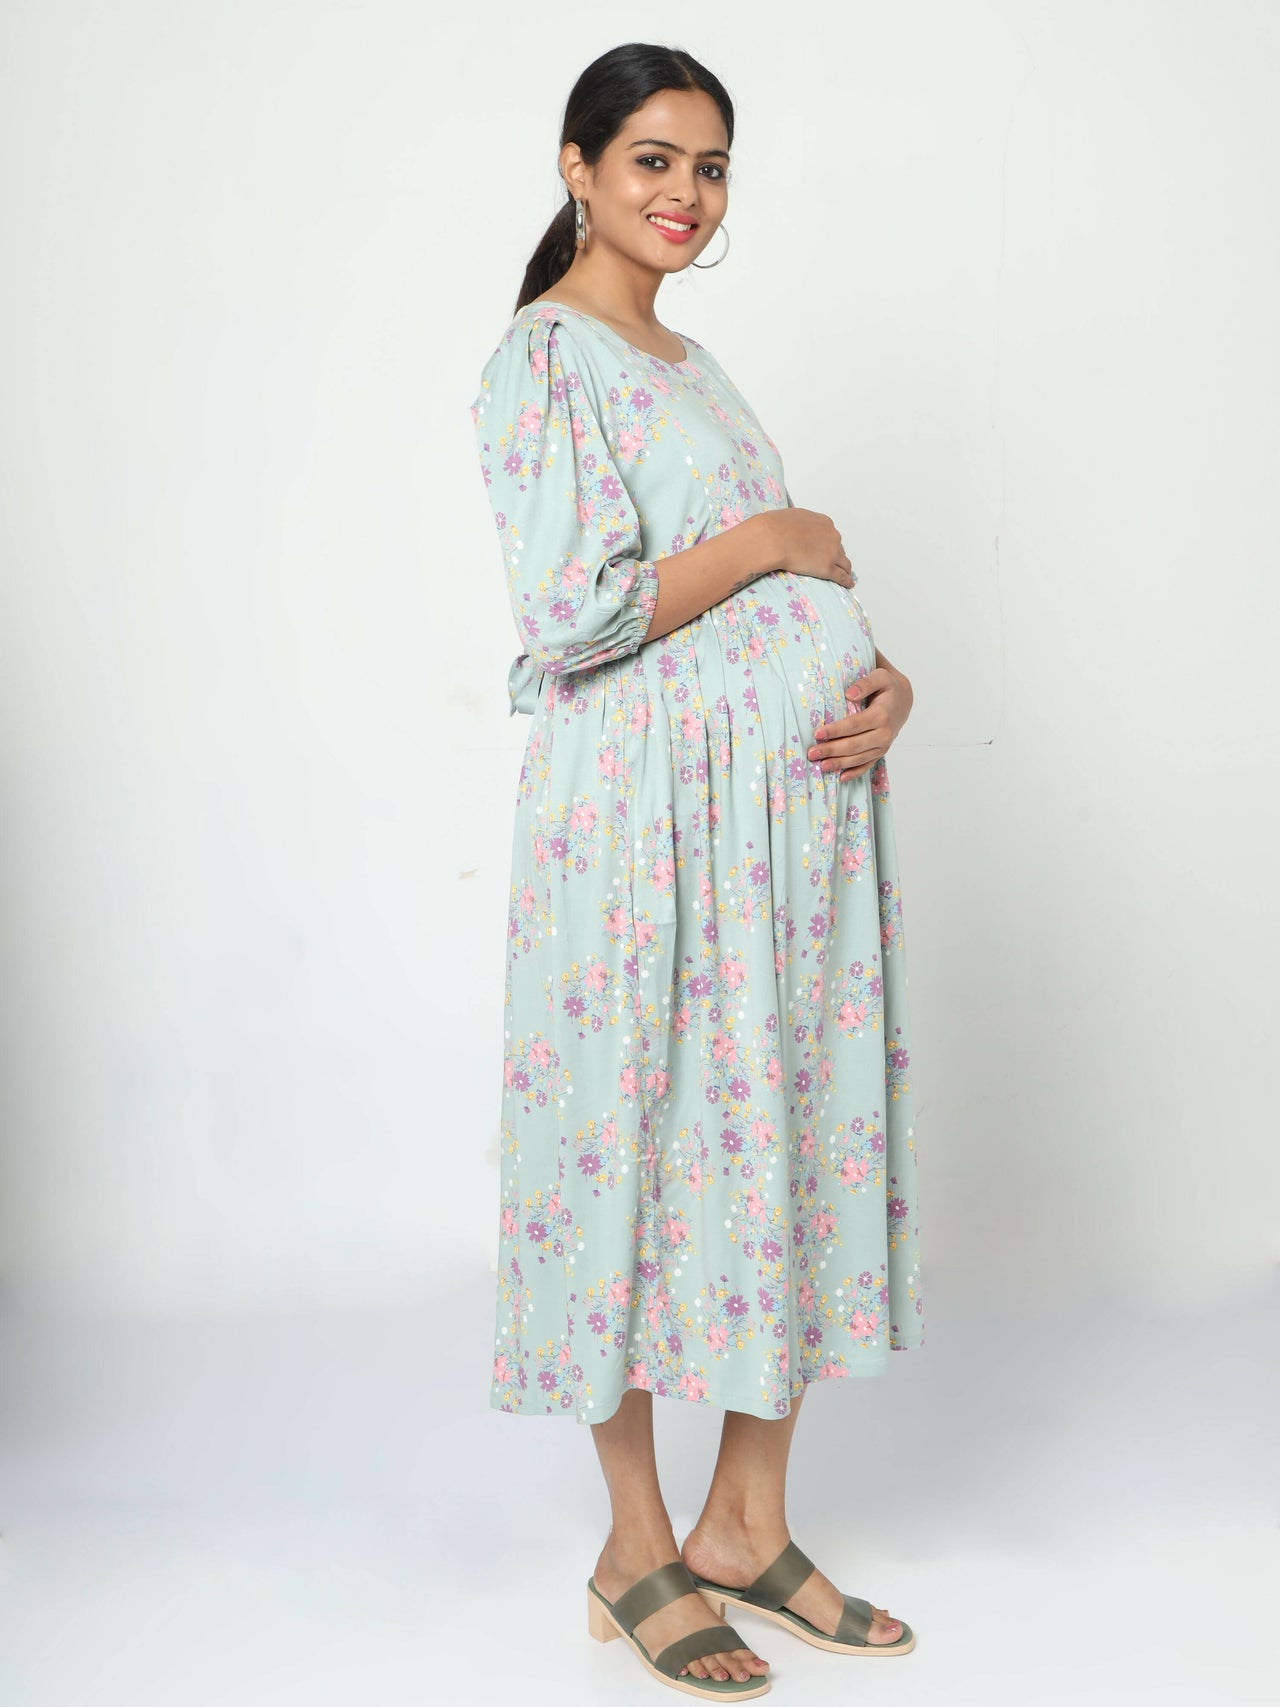 Manet Three Fourth Maternity Dress Pink Floral Print With Concealed Zipper Nursing Access - Green - Distacart